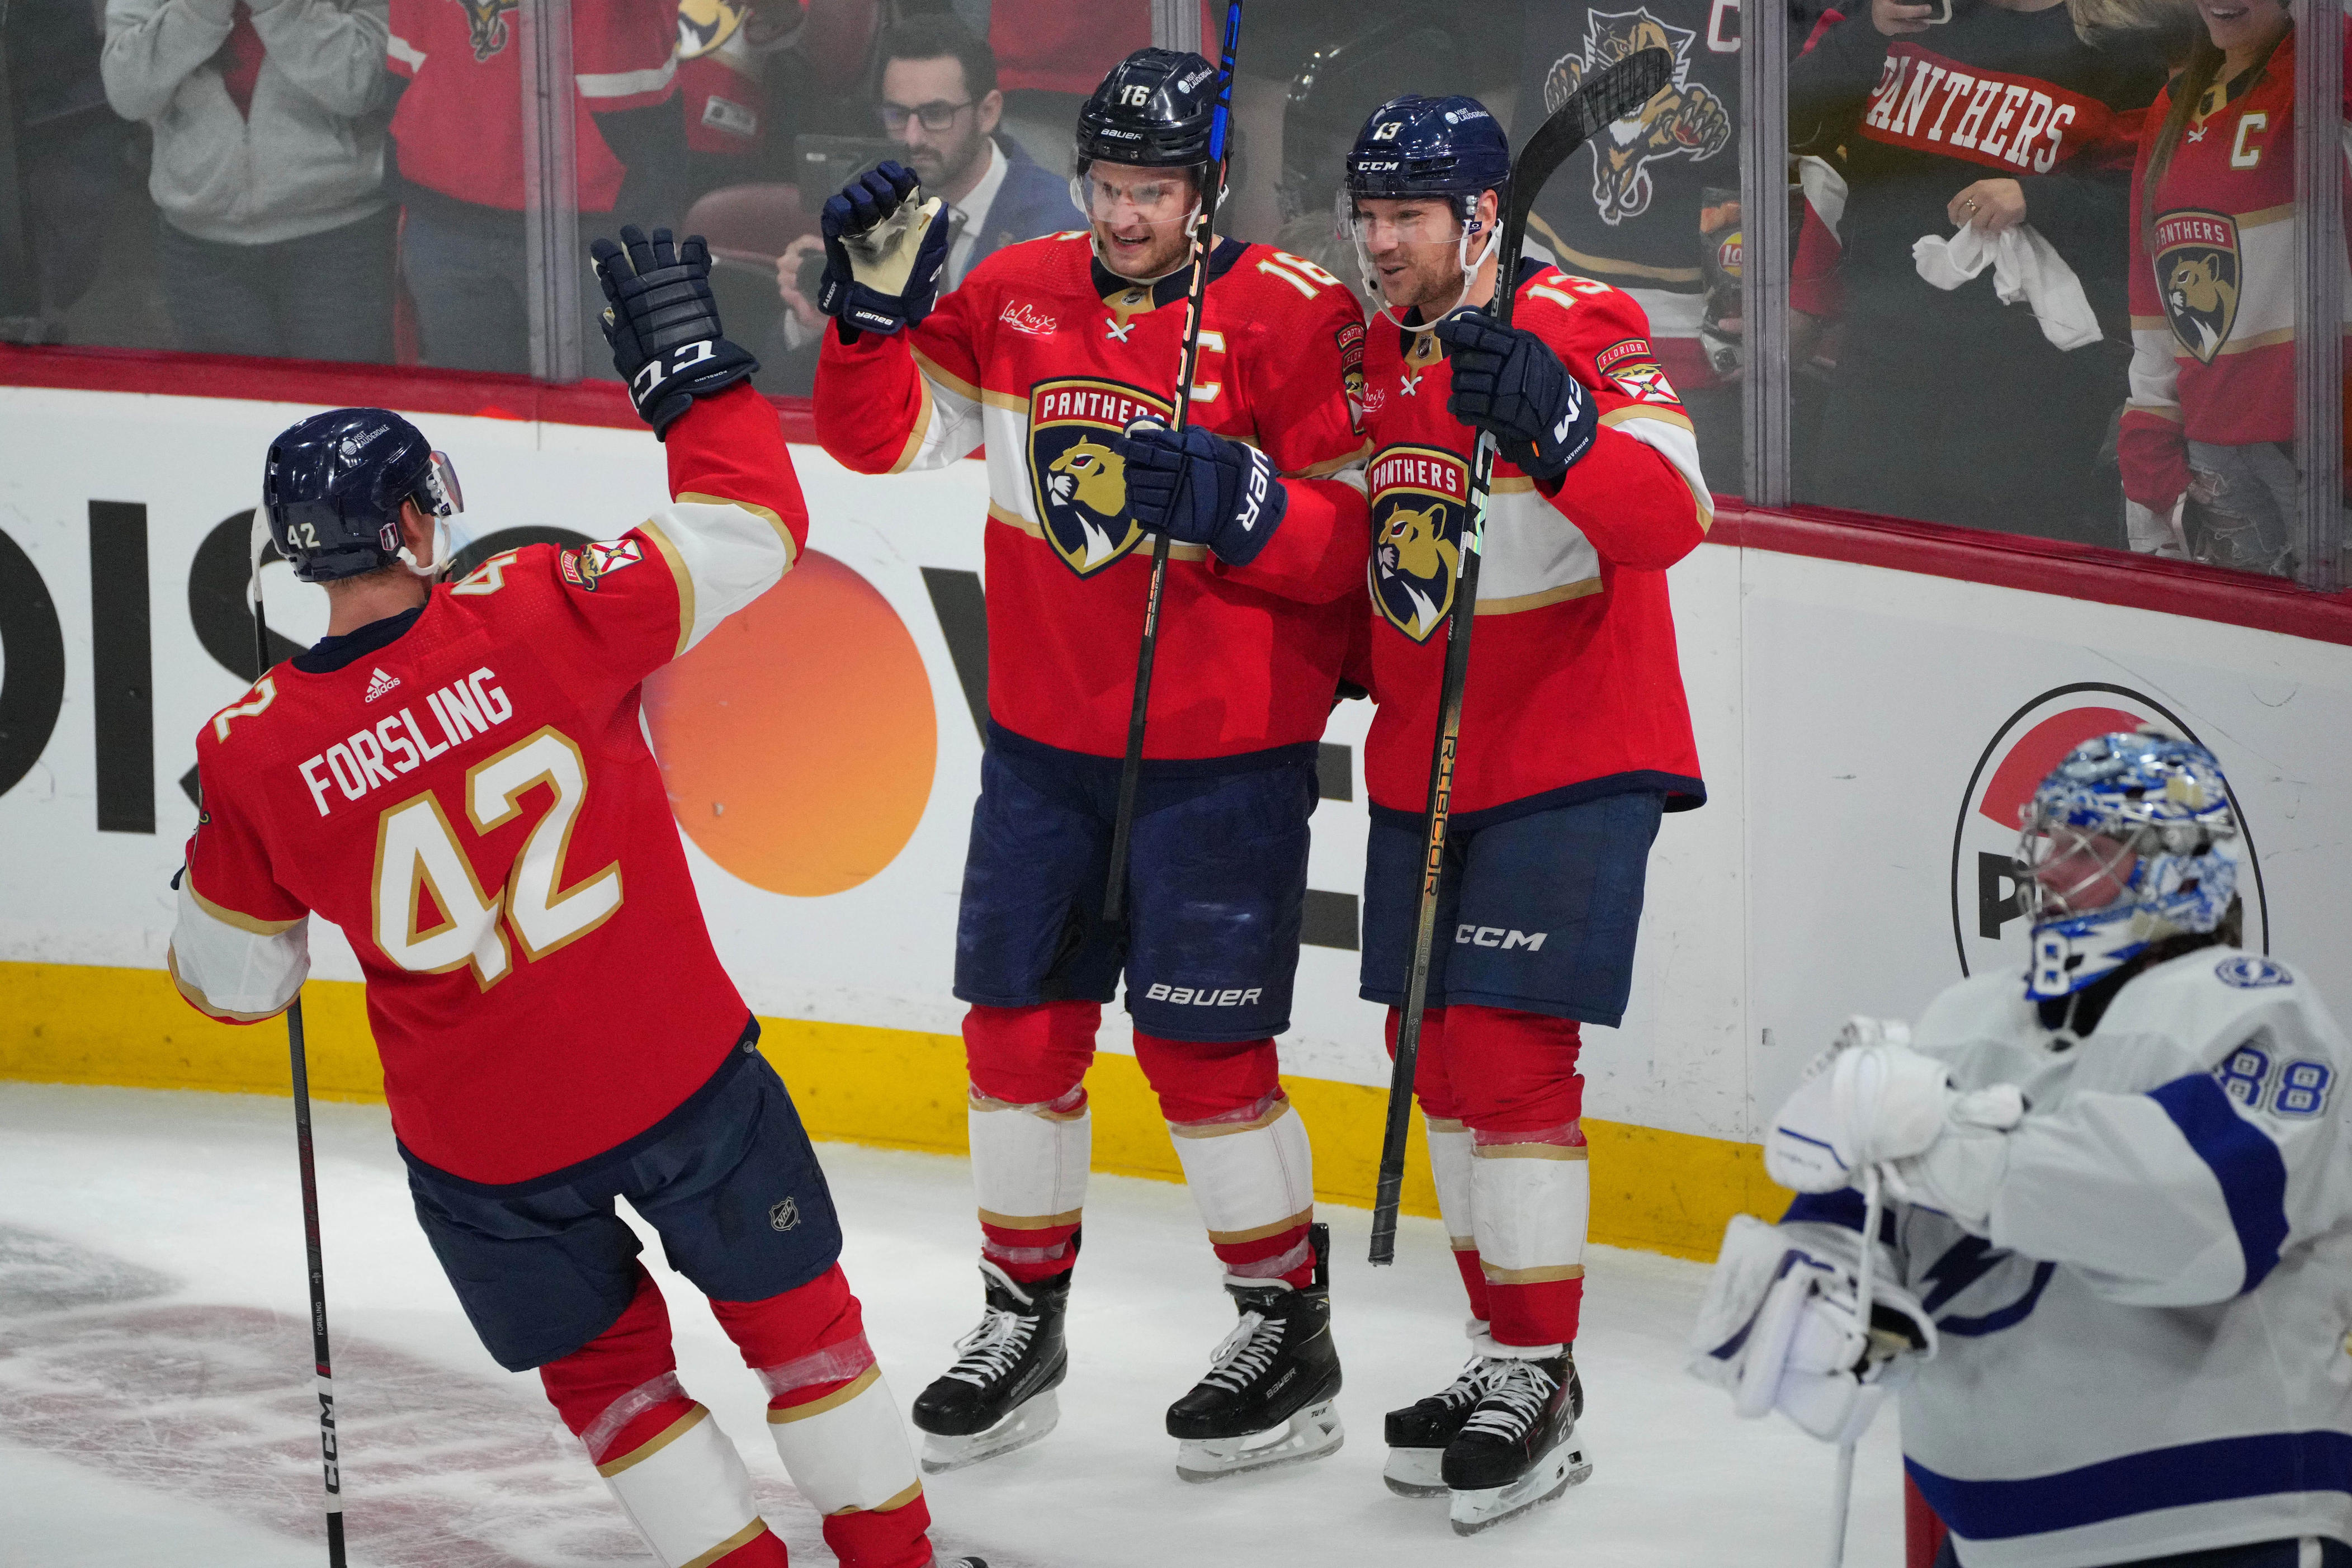 panthers claim battle of florida, oust lightning from nhl playoffs in first round